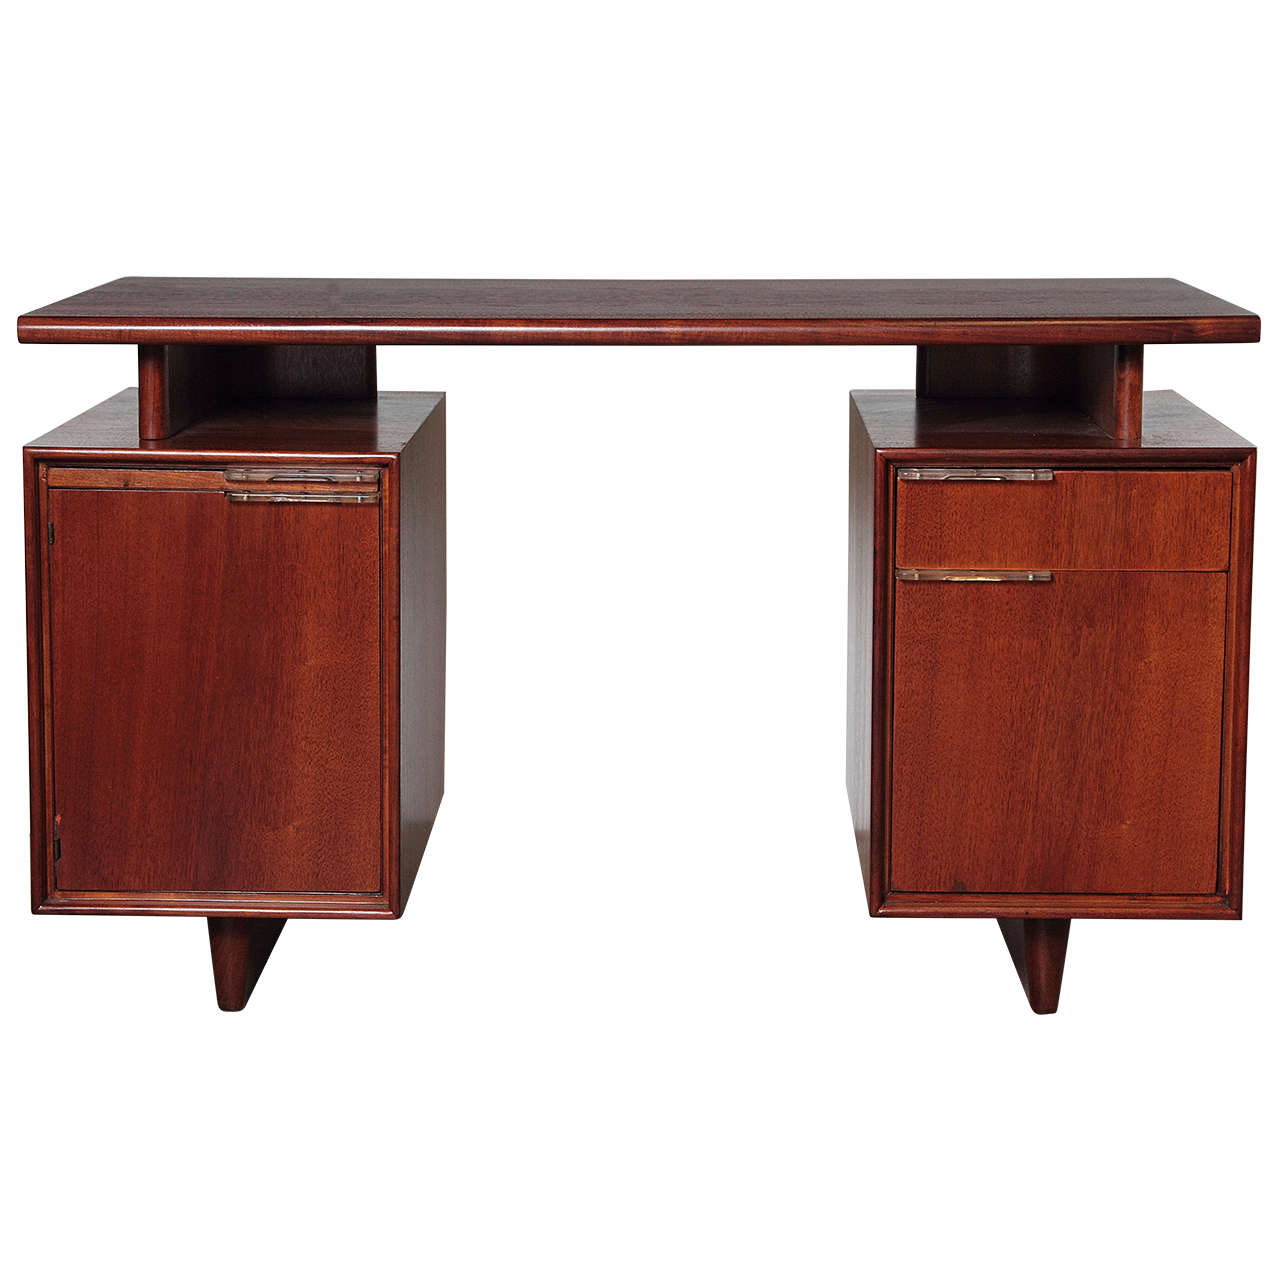 Gilbert Rohde Herman Miller "All Walnut" Inlaid Desk with Lucite Pulls